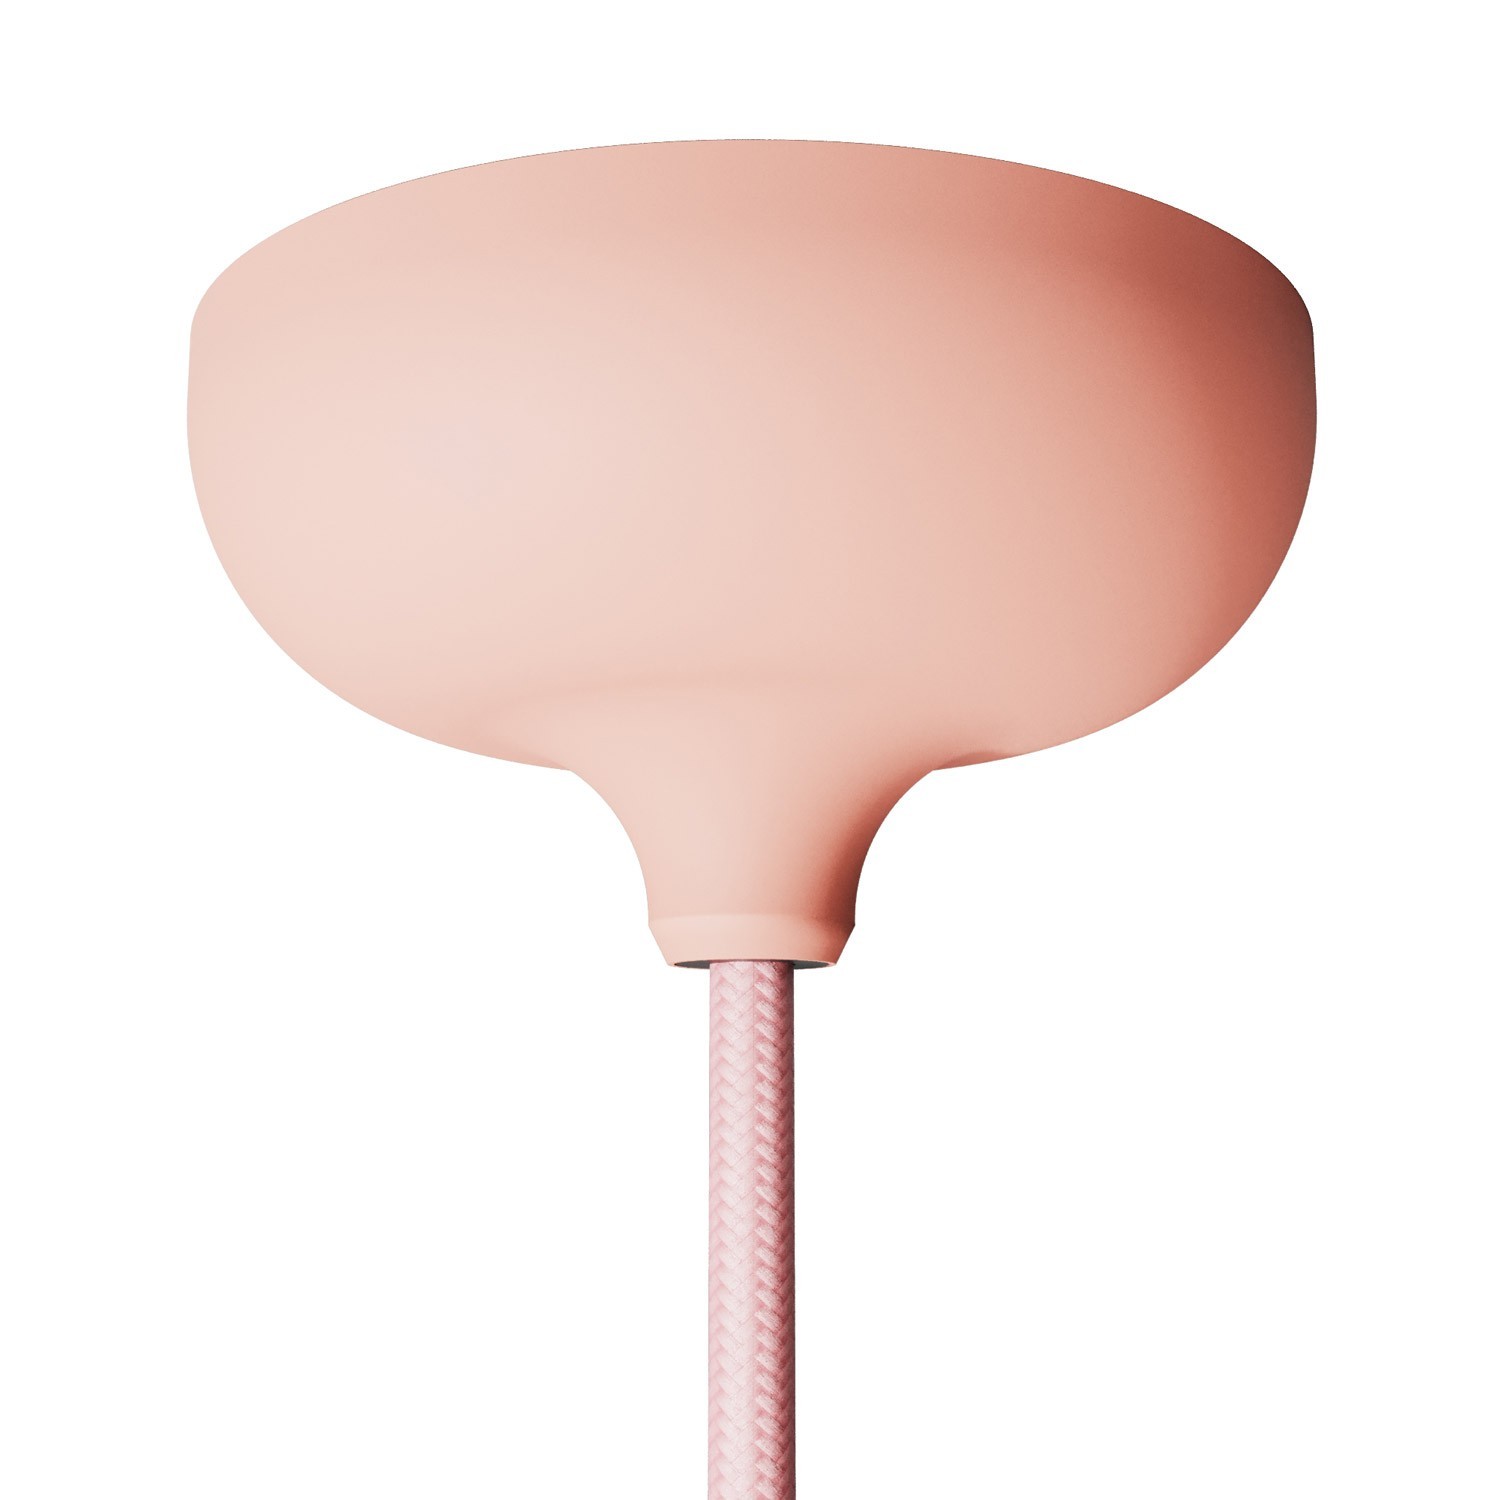 Silicone rose kit with central hole and arrangement for a side hole